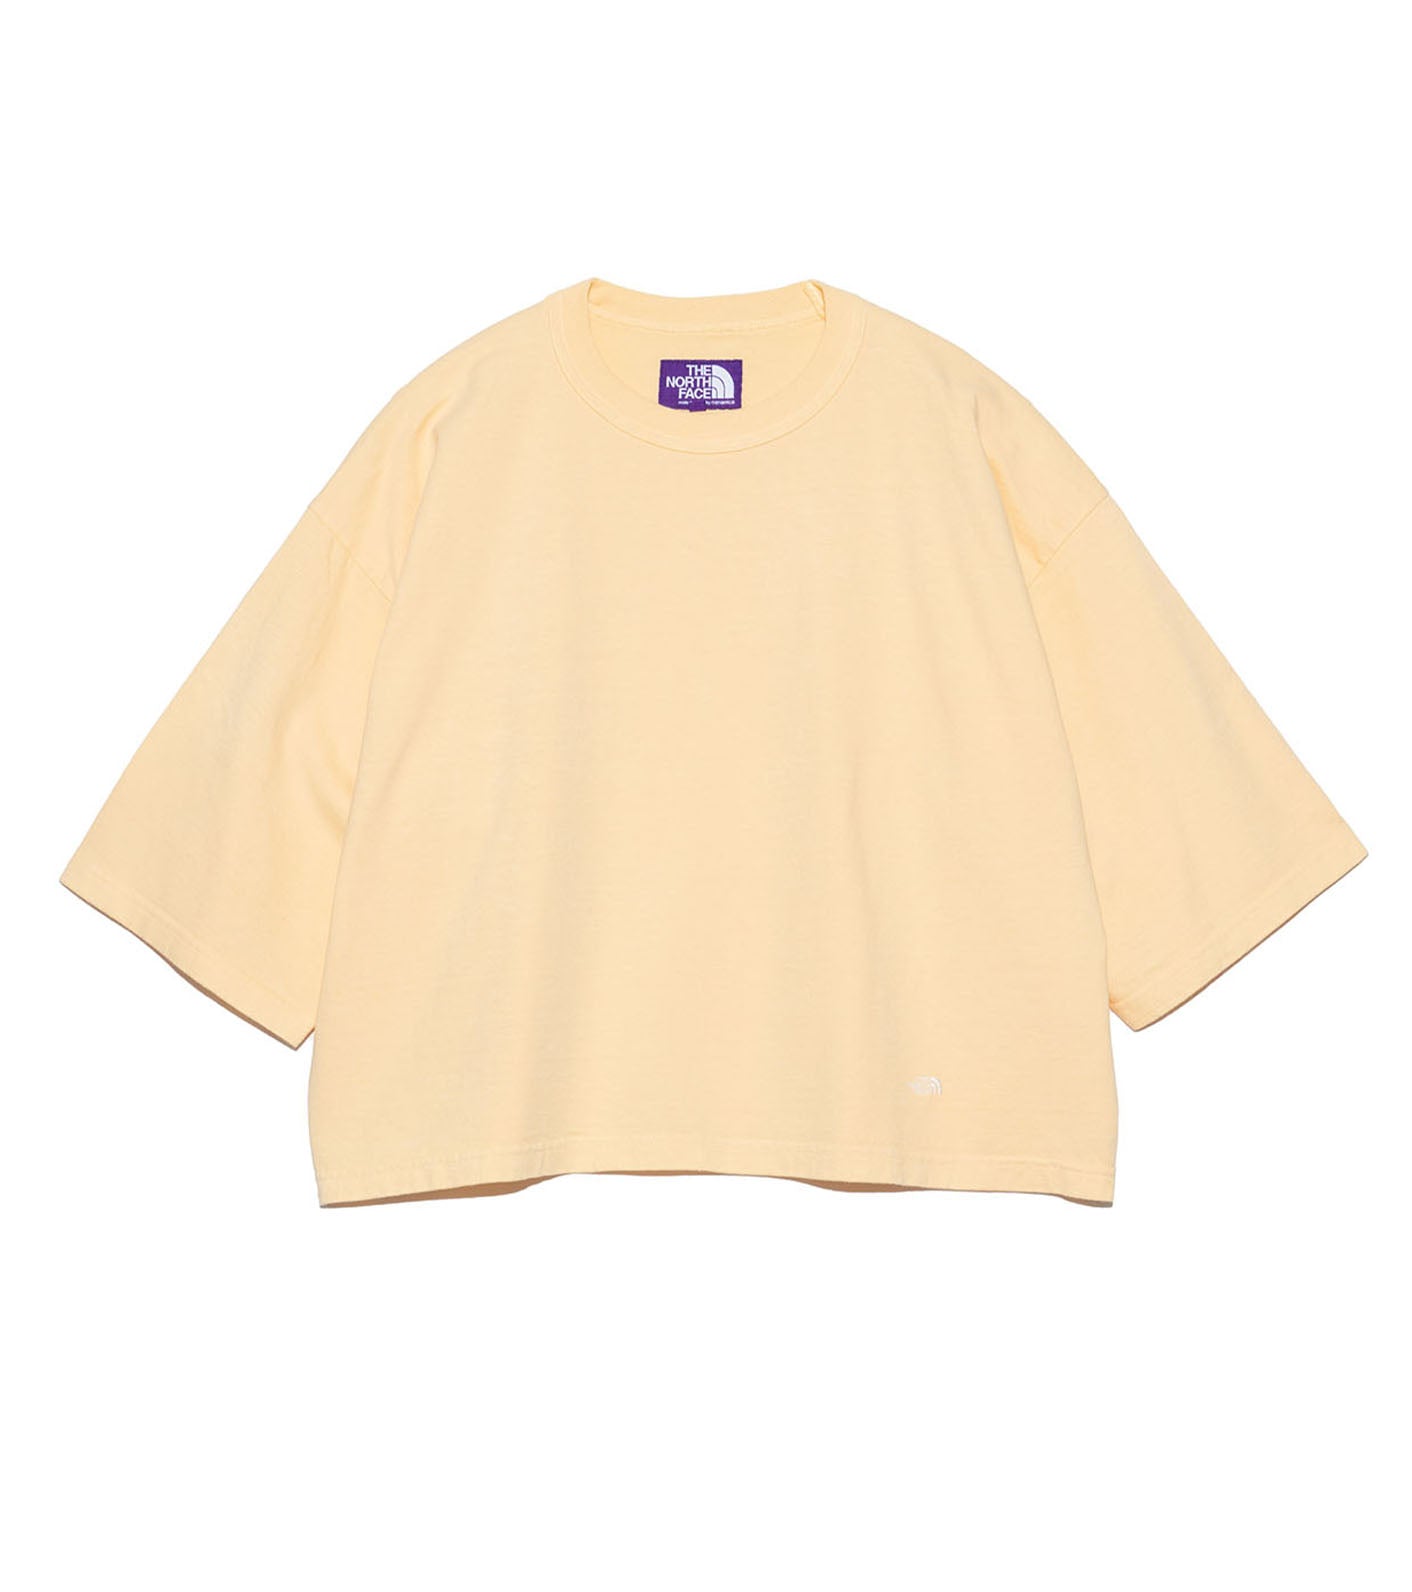 THE NORTH FACE PURPLE LABEL 7oz Cropped Tee